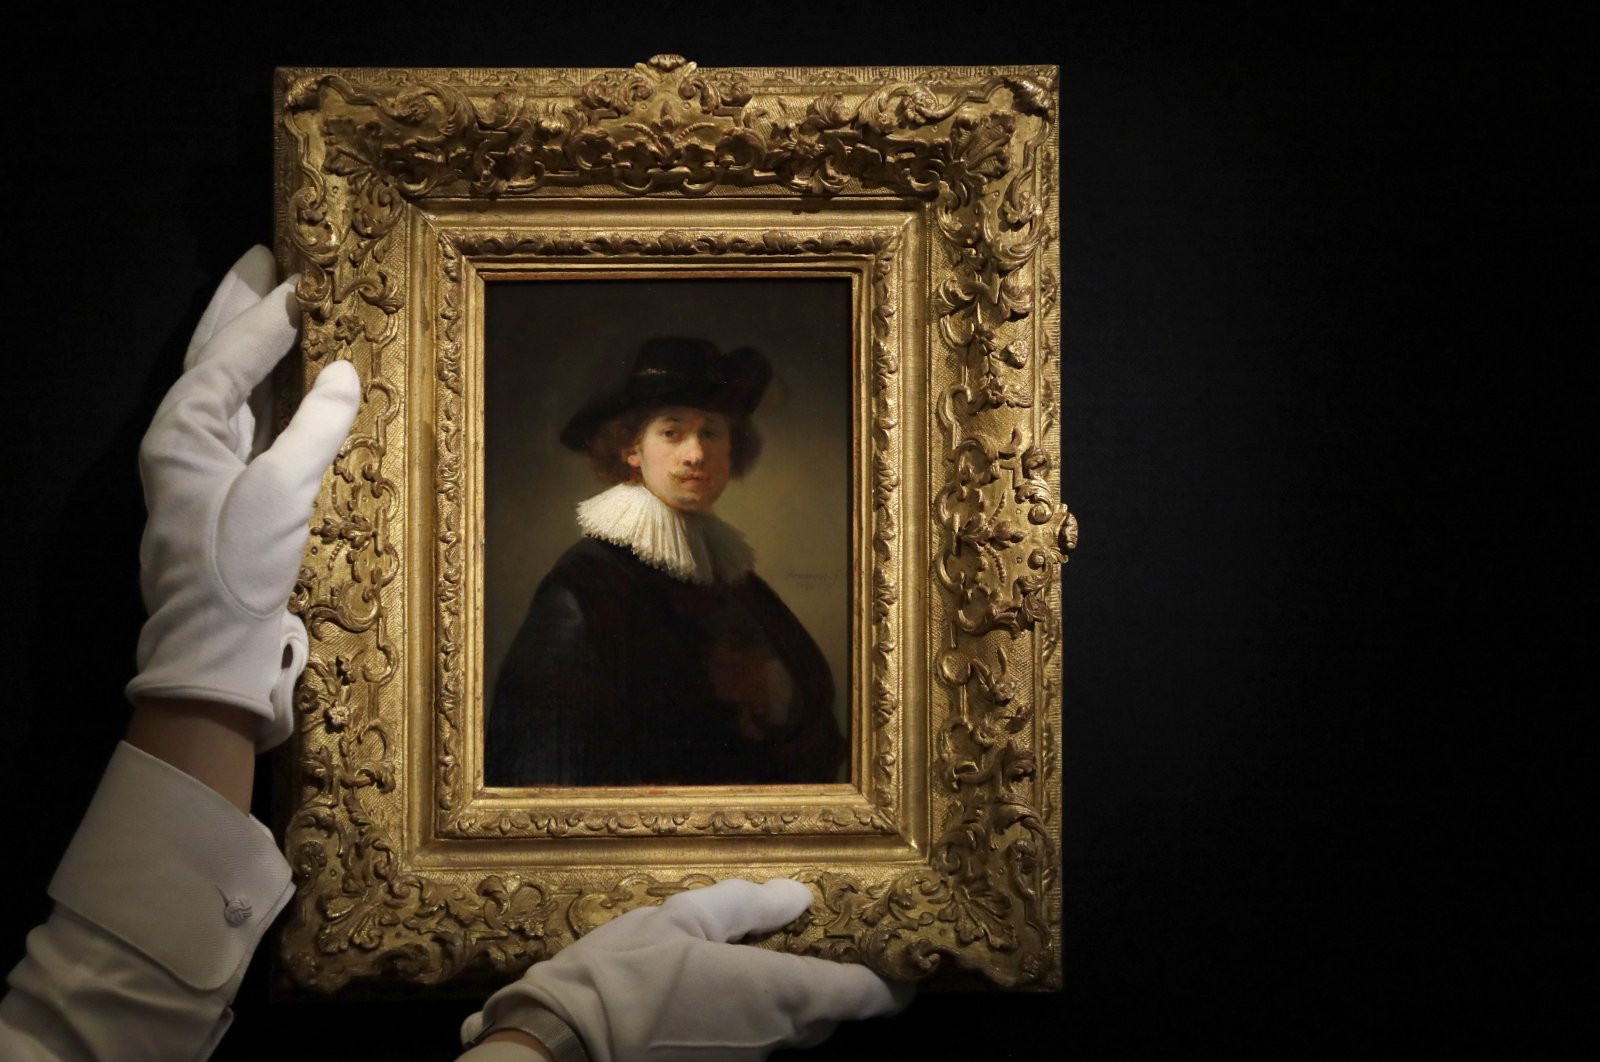 A Sotheby's employee adjusts a painting by Rembrandt Van Rijn called "Self-portrait, wearing a ruff and black hat" at Sotheby's auction rooms in London, Britain, July 23, 2020. (AP Photo)